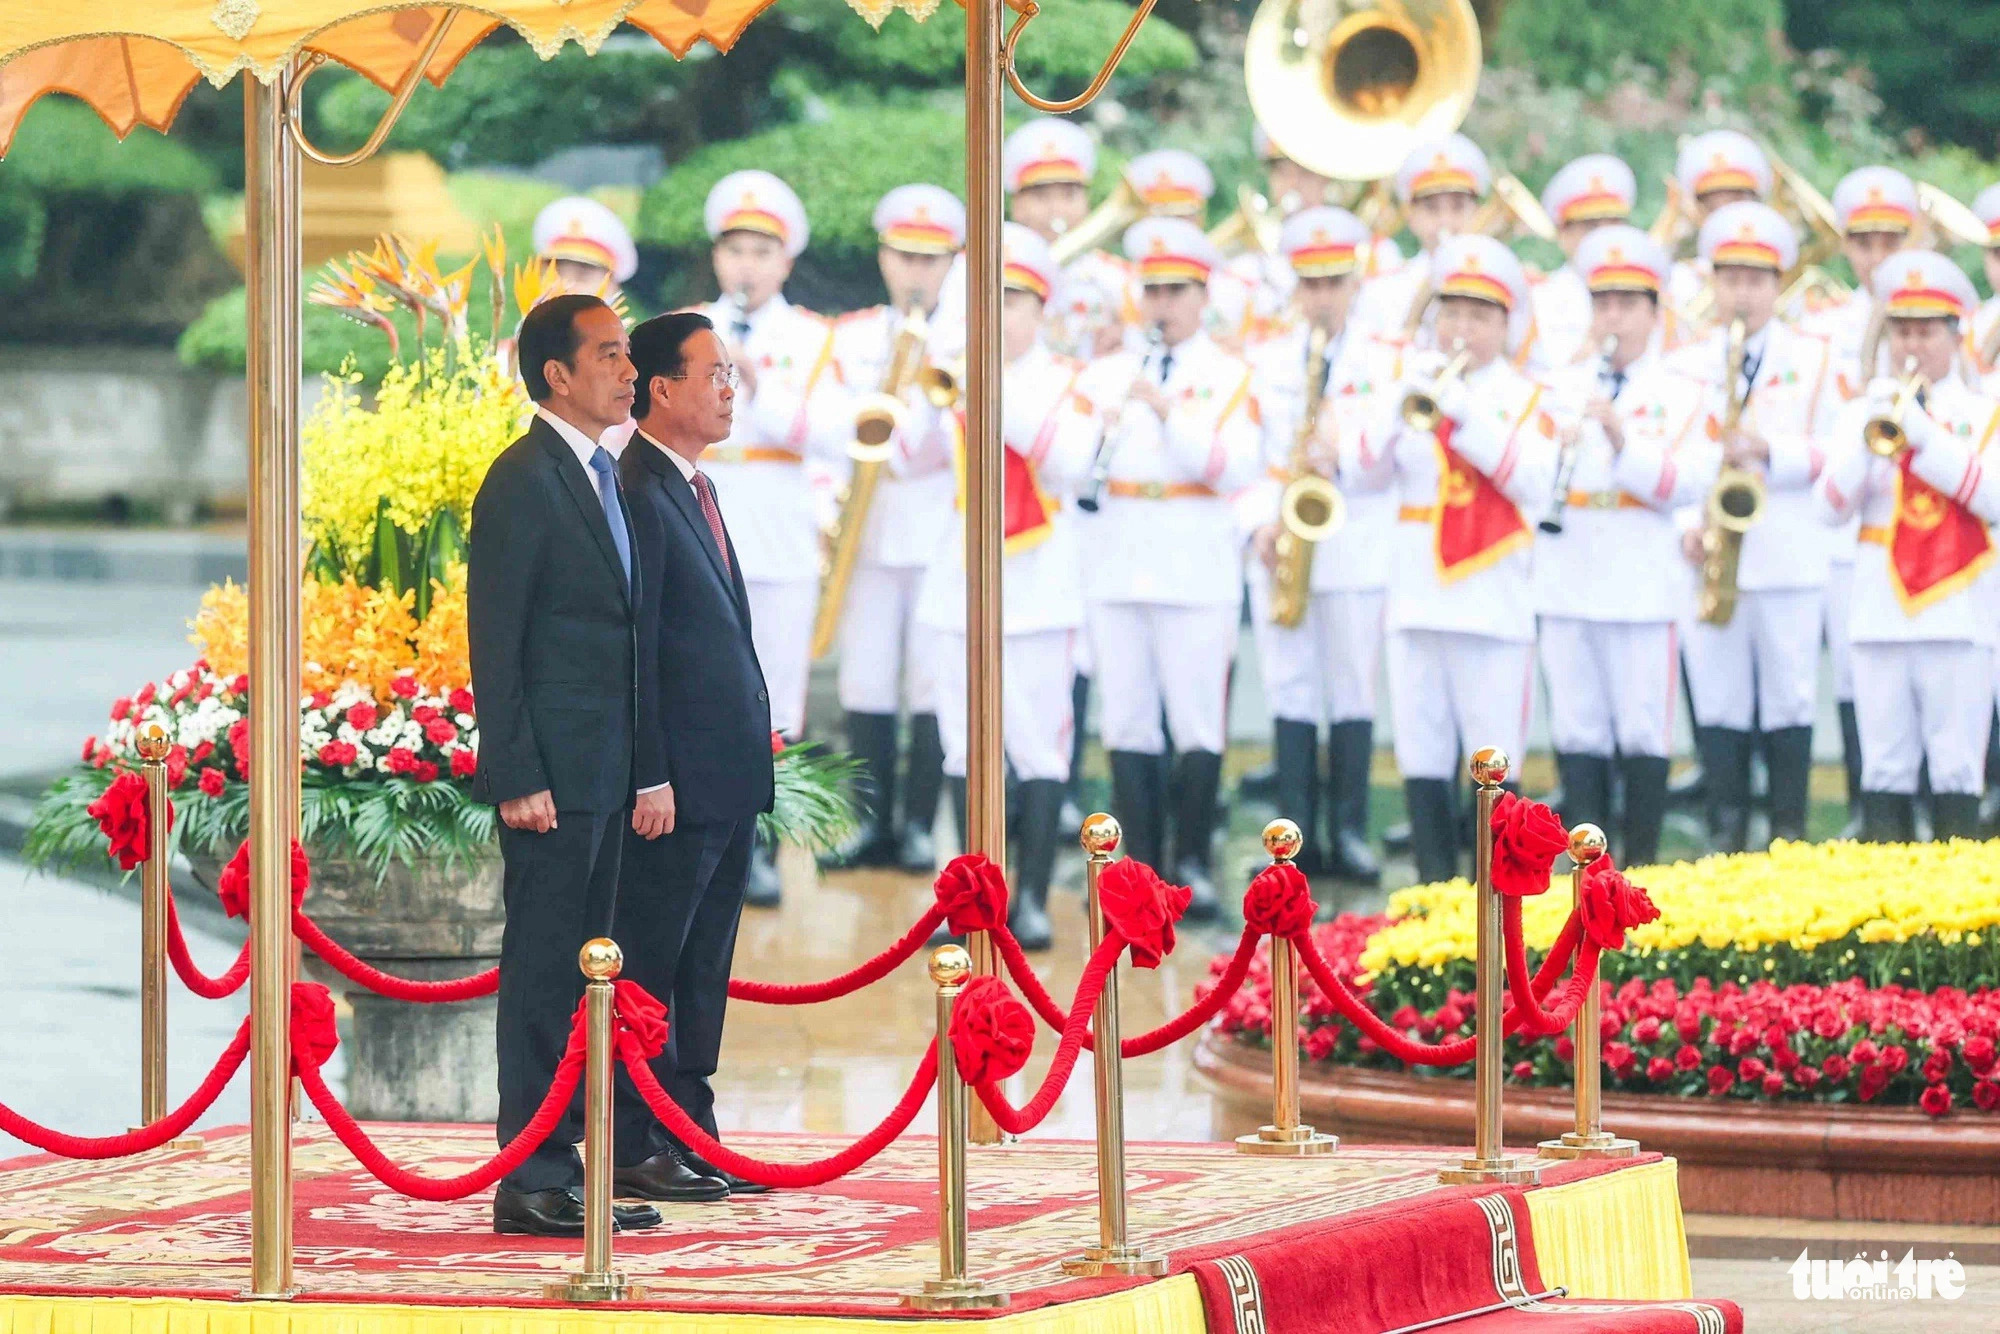 This is the second state visit to Vietnam by Indonesian President Joko Widodo since taking office in 2014. Photo: Nguyen Khanh / Tuoi Tre